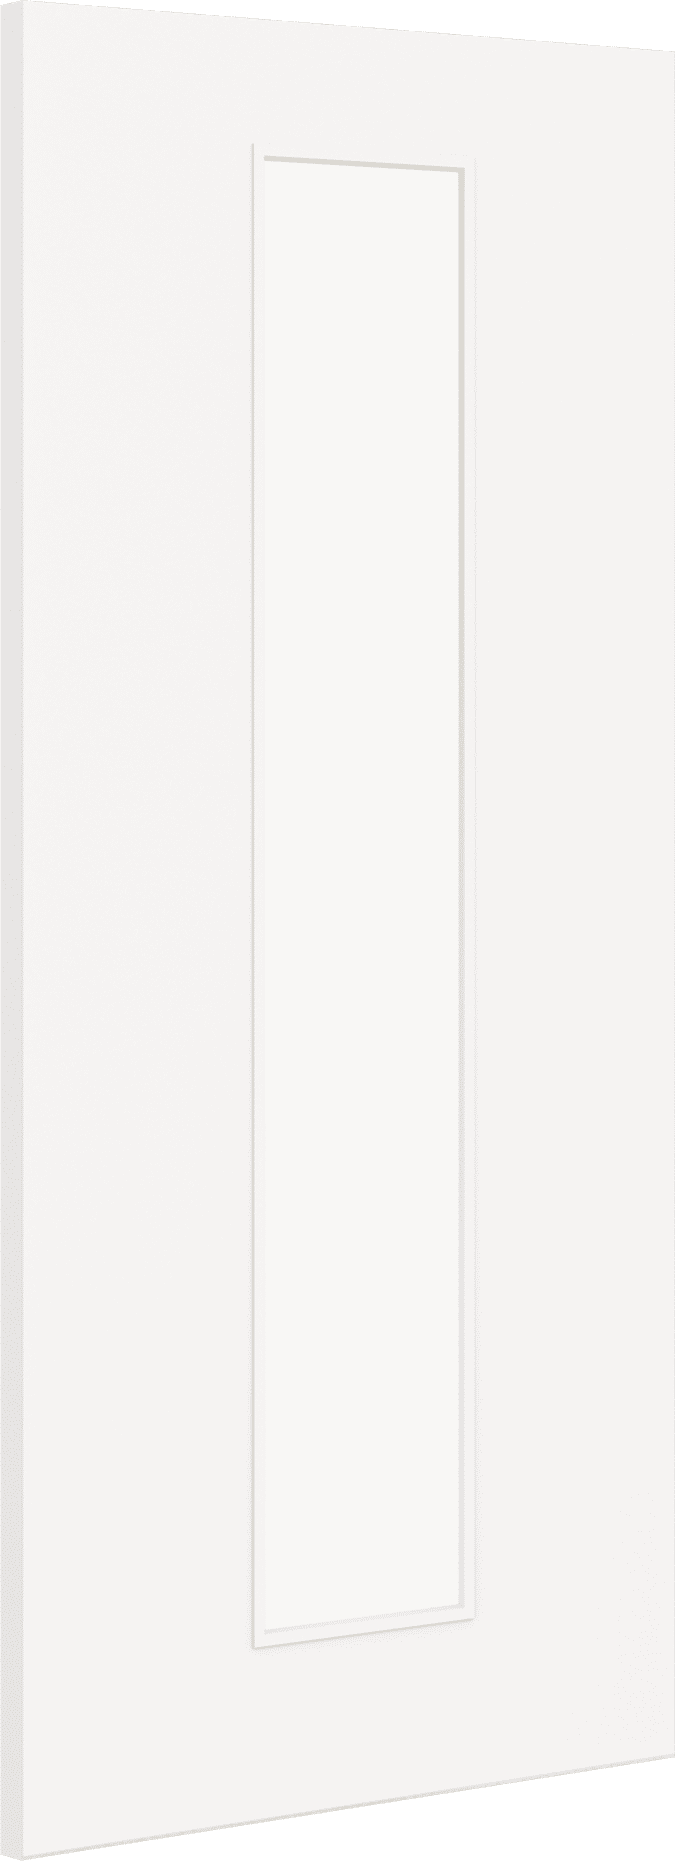 1981mm x 686mm x 44mm (27") Architectural Paint Grade White 10 Clear Glazed Fire Door Blank